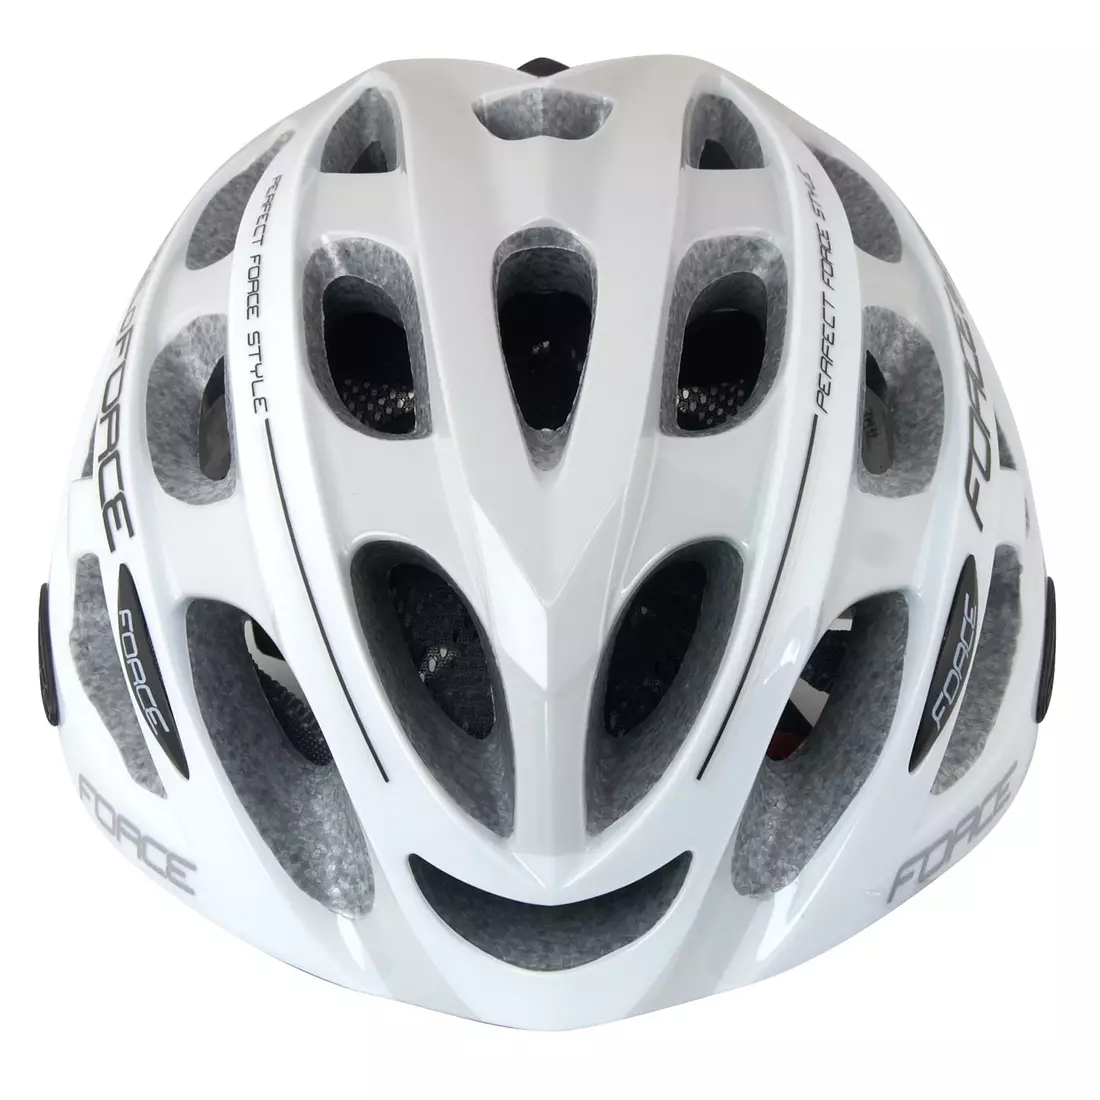 FORCE BUFFALO bicycle helmet, gray and white